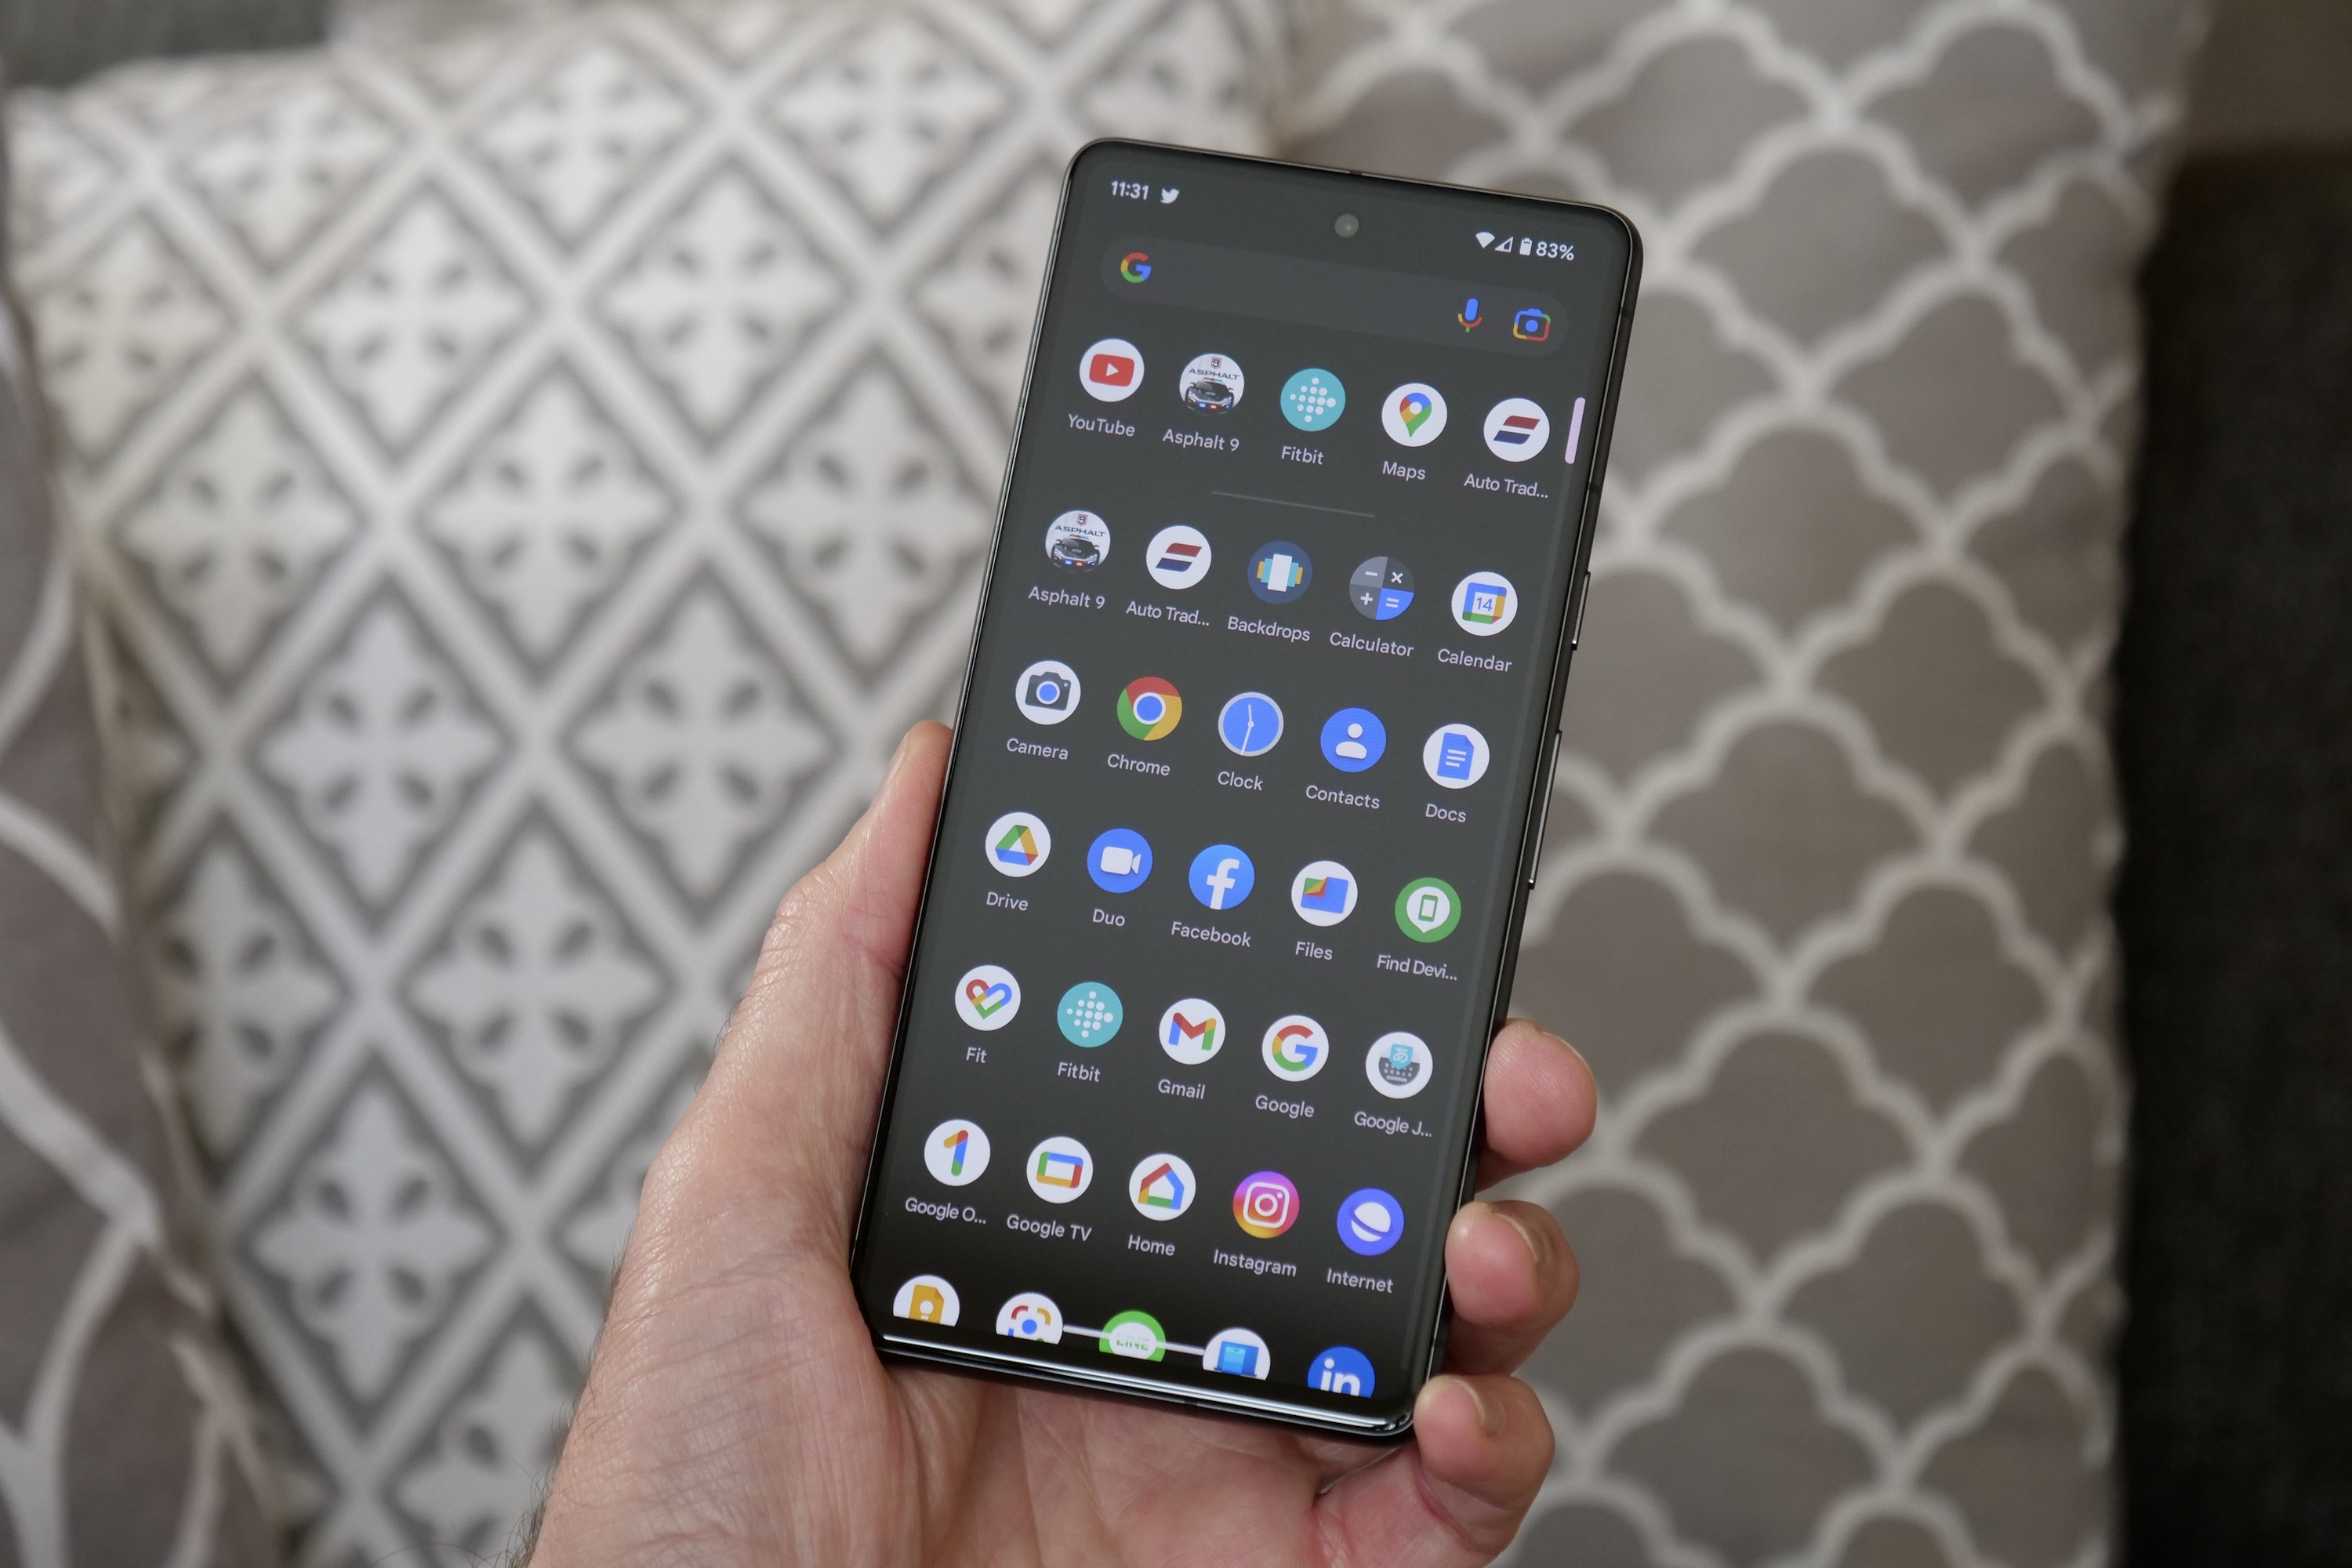 Google 7 Pixel Review: Superb Android Phone at a Great Price